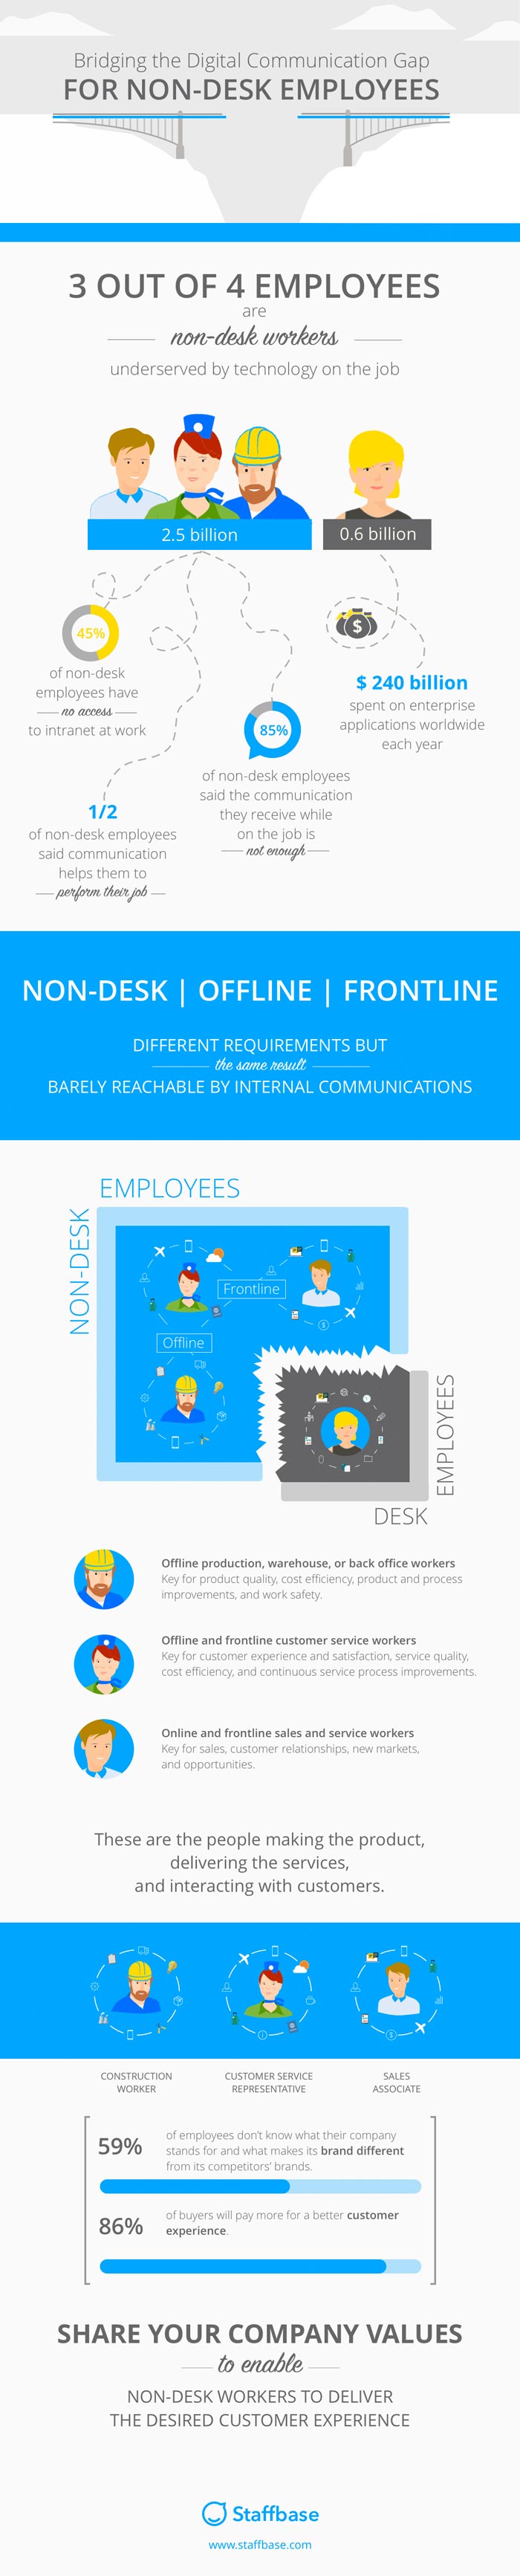 Internal Communications for Non-Desk, Frontline and Offline Employees